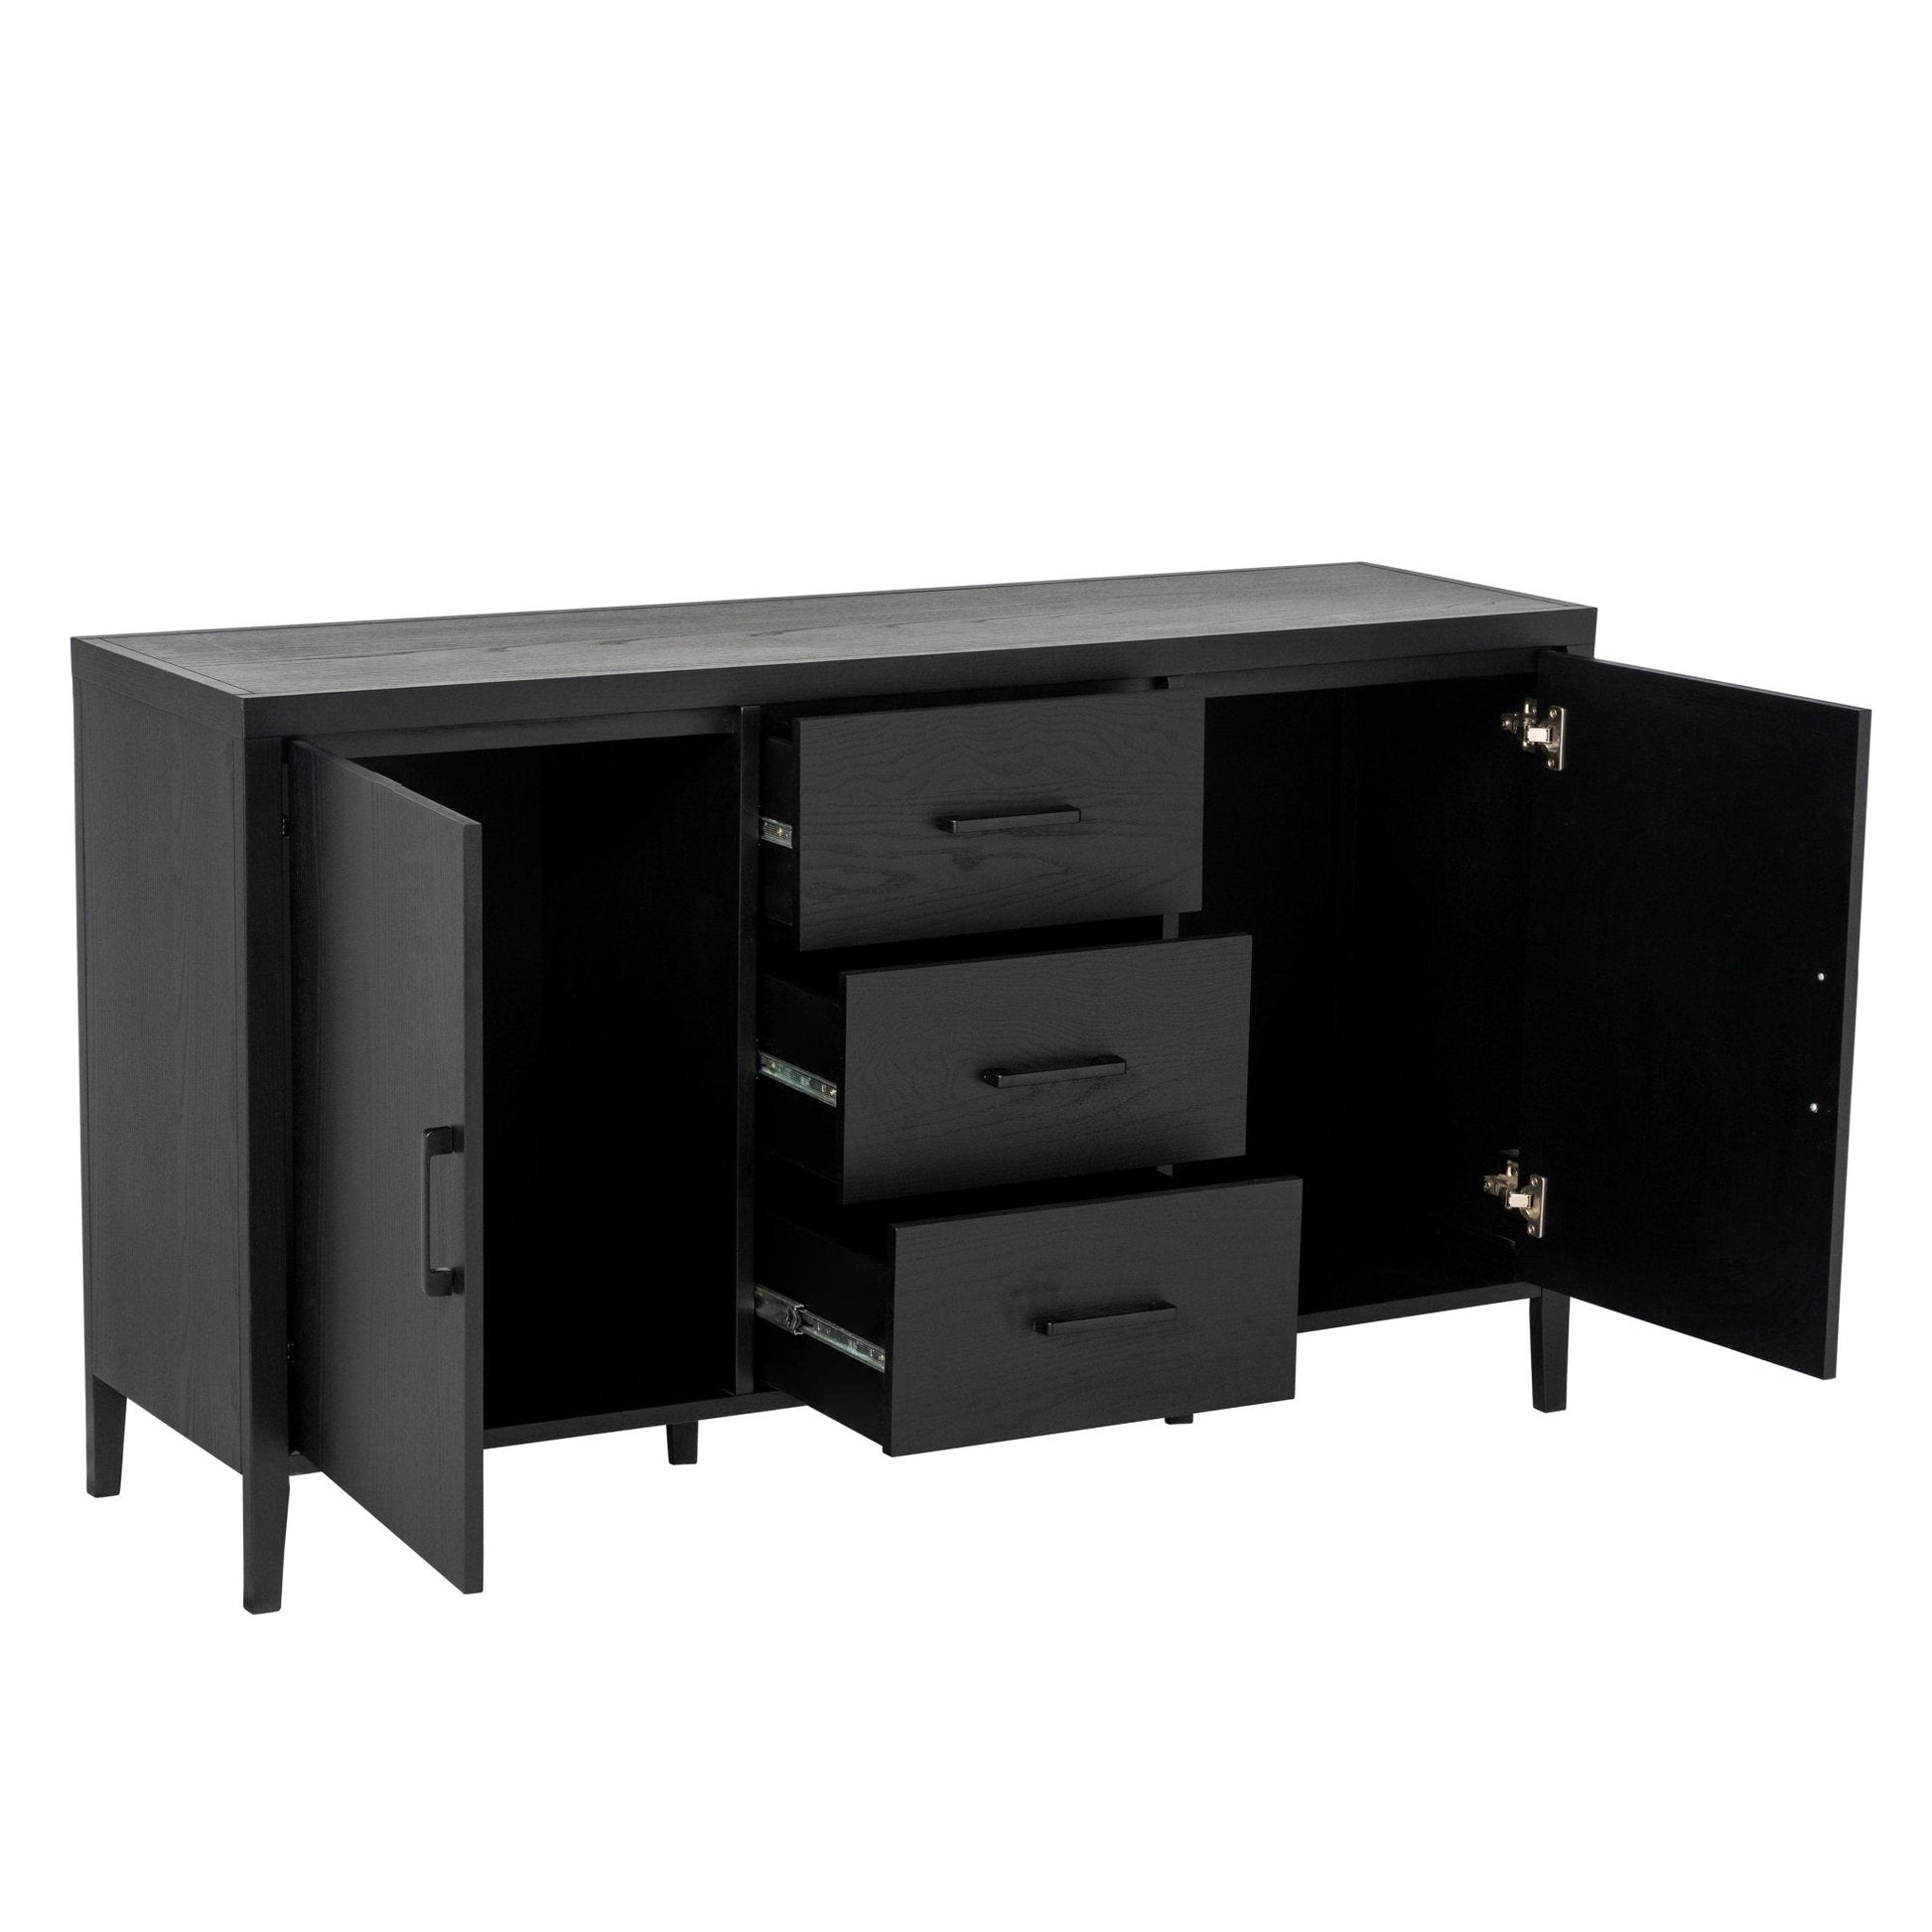 Aria Sideboard With Drawers - Black - DUSK